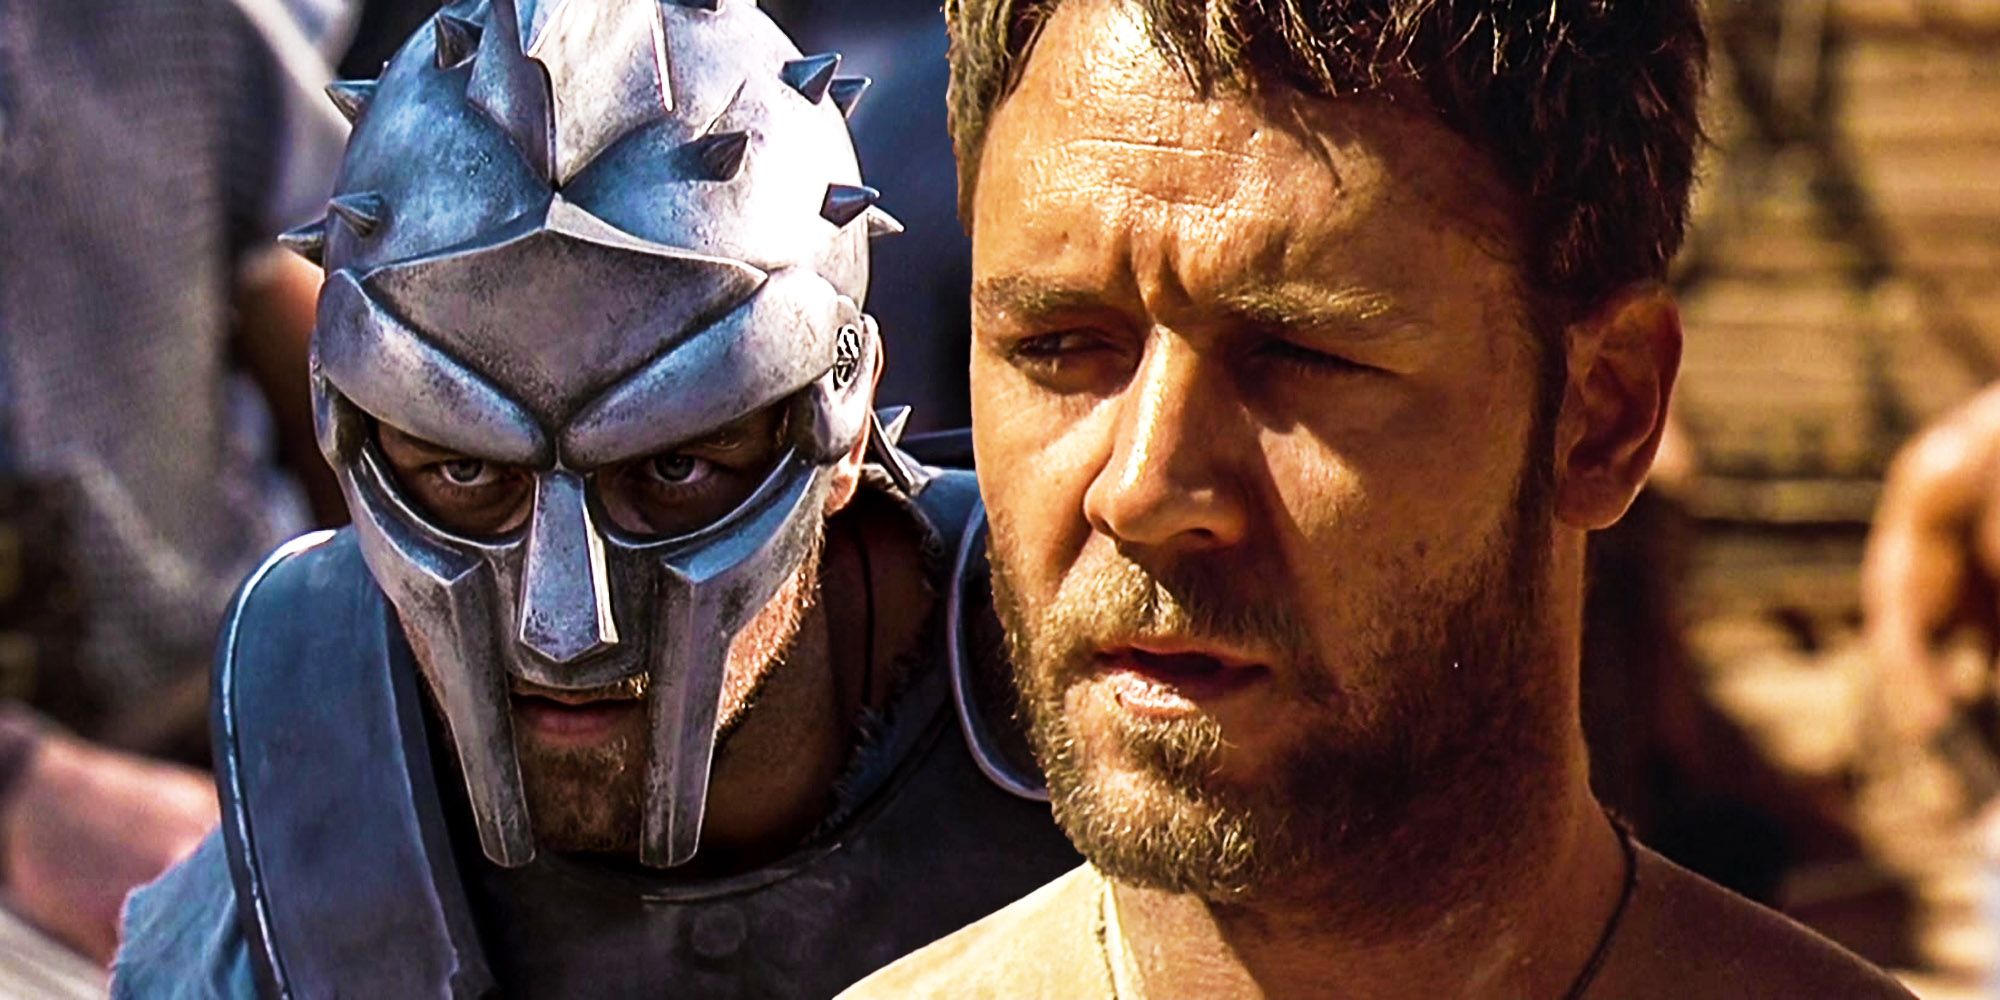 Custom image of Russell Crowe as Maximus with a helmet and without a helmet in Gladaitor